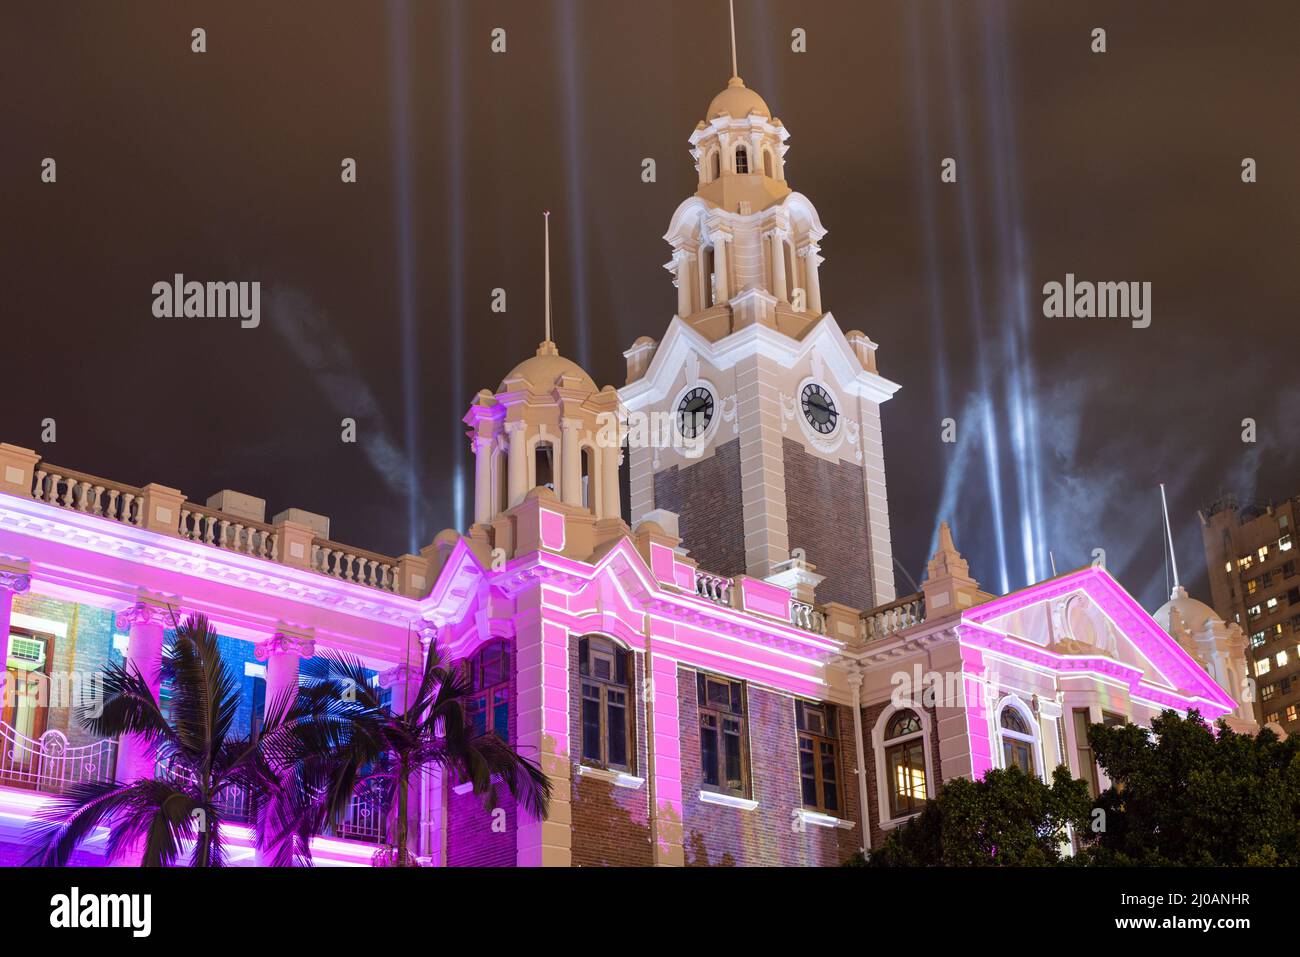 16 3 2022 digital light and laser shows in Main building of university of Hong Kong (HKU) in the night celebrating its 111th anniversary, Hong Kong Stock Photo